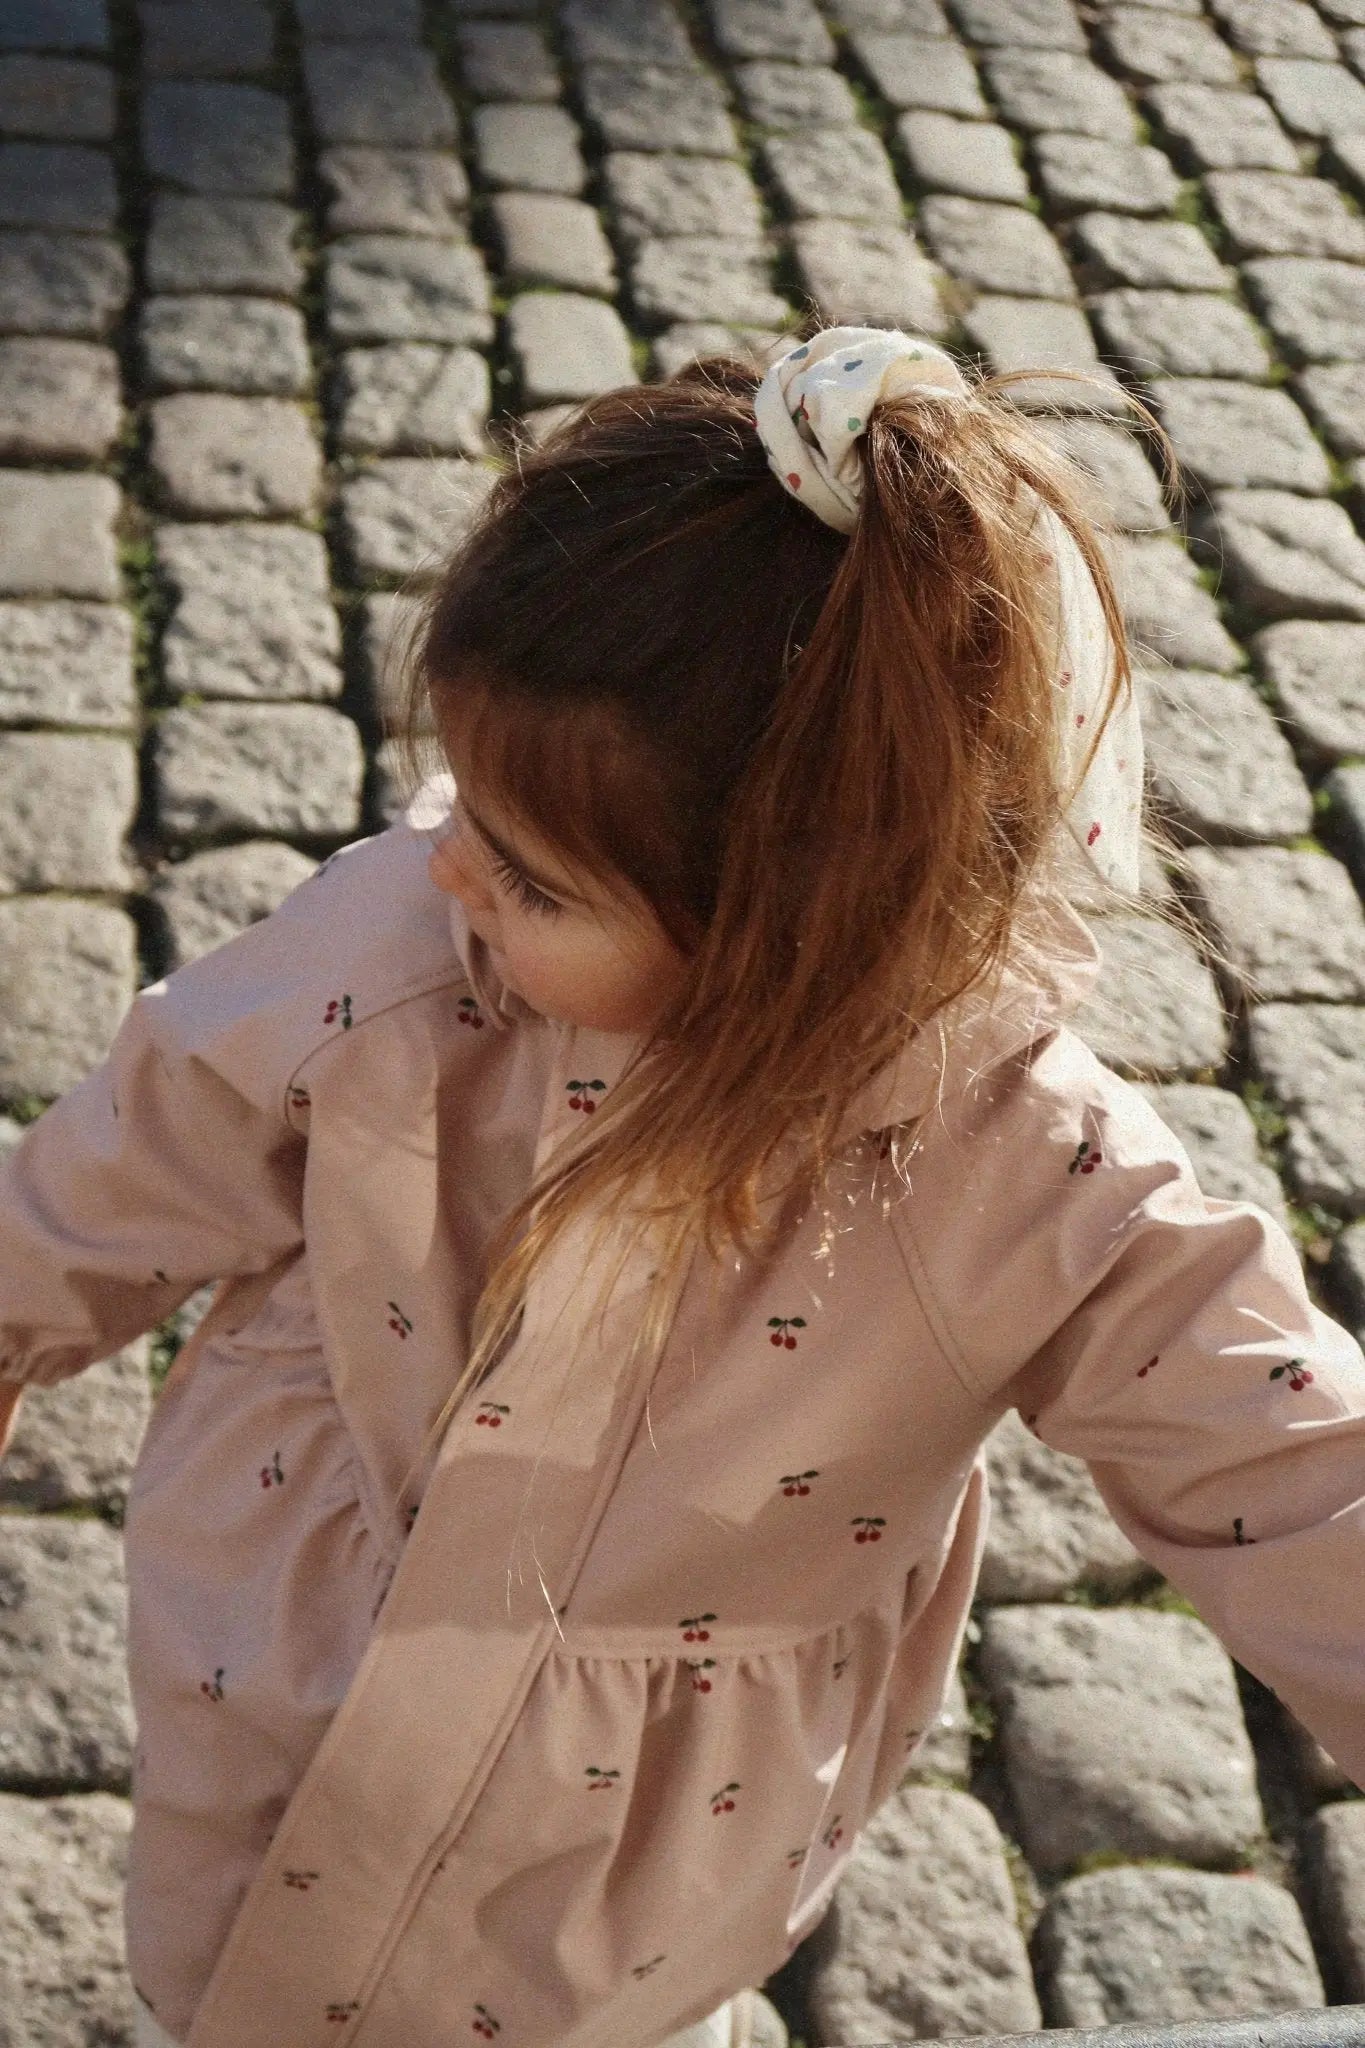 Cherry Blush Lui Jacket Girl, Lightweight Outerwear for Kids, Freedom to Move  Konges Sløjd   